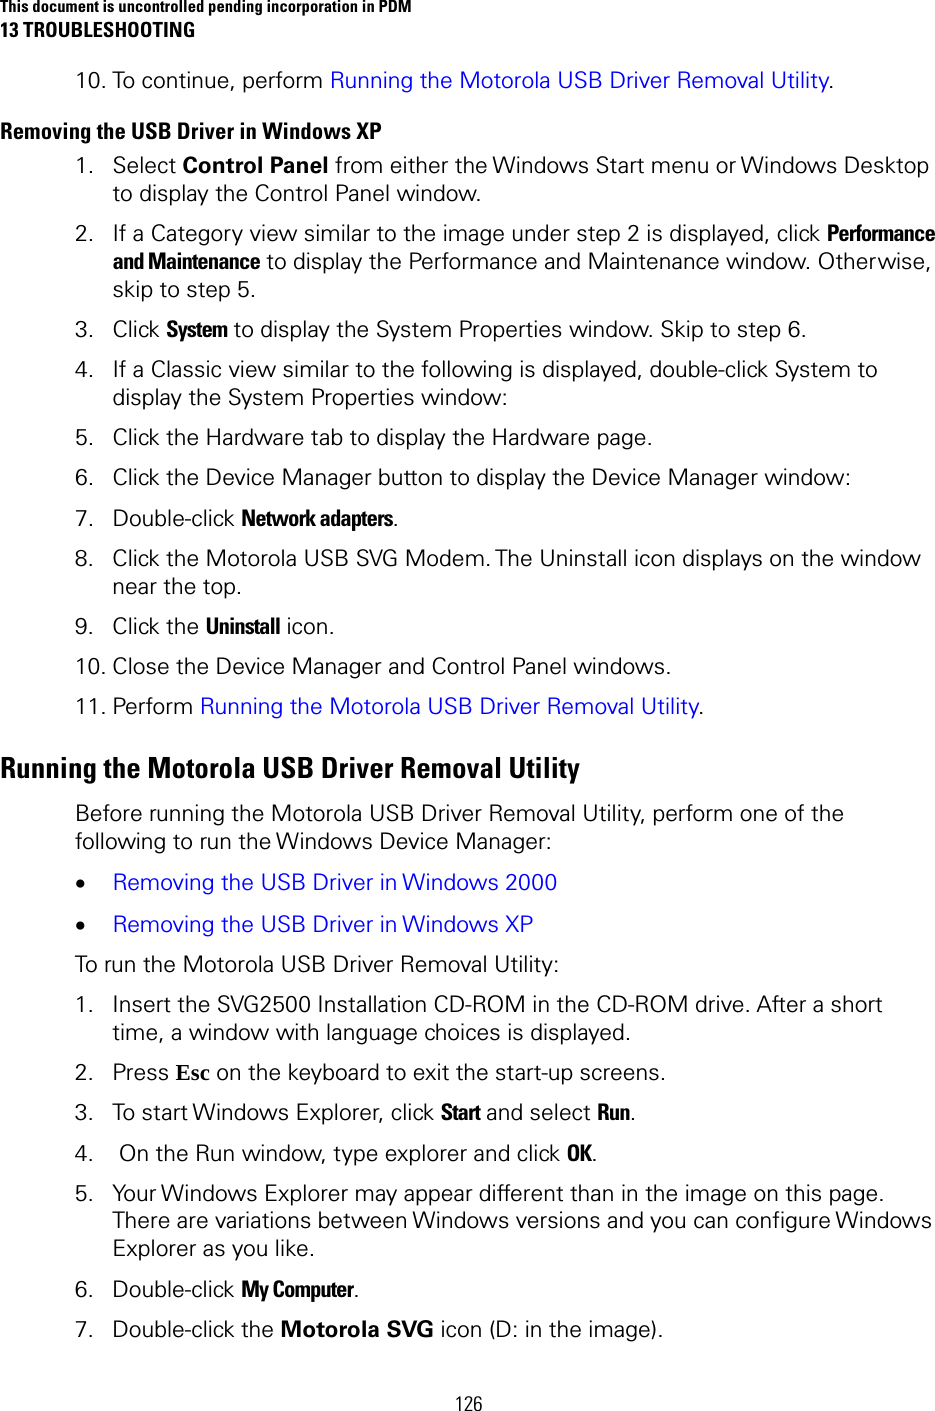 This document is uncontrolled pending incorporation in PDM 13 TROUBLESHOOTING 126 10. To continue, perform Running the Motorola USB Driver Removal Utility. Removing the USB Driver in Windows XP  1. Select Control Panel from either the Windows Start menu or Windows Desktop to display the Control Panel window. 2. If a Category view similar to the image under step 2 is displayed, click Performance and Maintenance to display the Performance and Maintenance window. Otherwise, skip to step 5.  3. Click System to display the System Properties window. Skip to step 6.  4. If a Classic view similar to the following is displayed, double-click System to display the System Properties window:  5. Click the Hardware tab to display the Hardware page.  6. Click the Device Manager button to display the Device Manager window:  7. Double-click Network adapters.  8. Click the Motorola USB SVG Modem. The Uninstall icon displays on the window near the top.  9. Click the Uninstall icon.  10. Close the Device Manager and Control Panel windows.  11. Perform Running the Motorola USB Driver Removal Utility.  Running the Motorola USB Driver Removal Utility  Before running the Motorola USB Driver Removal Utility, perform one of the following to run the Windows Device Manager:  • Removing the USB Driver in Windows 2000  • Removing the USB Driver in Windows XP  To run the Motorola USB Driver Removal Utility: 1. Insert the SVG2500 Installation CD-ROM in the CD-ROM drive. After a short time, a window with language choices is displayed.  2. Press Esc on the keyboard to exit the start-up screens. 3. To start Windows Explorer, click Start and select Run. 4.  On the Run window, type explorer and click OK.  5. Your Windows Explorer may appear different than in the image on this page. There are variations between Windows versions and you can configure Windows Explorer as you like.  6. Double-click My Computer. 7. Double-click the Motorola SVG icon (D: in the image). 